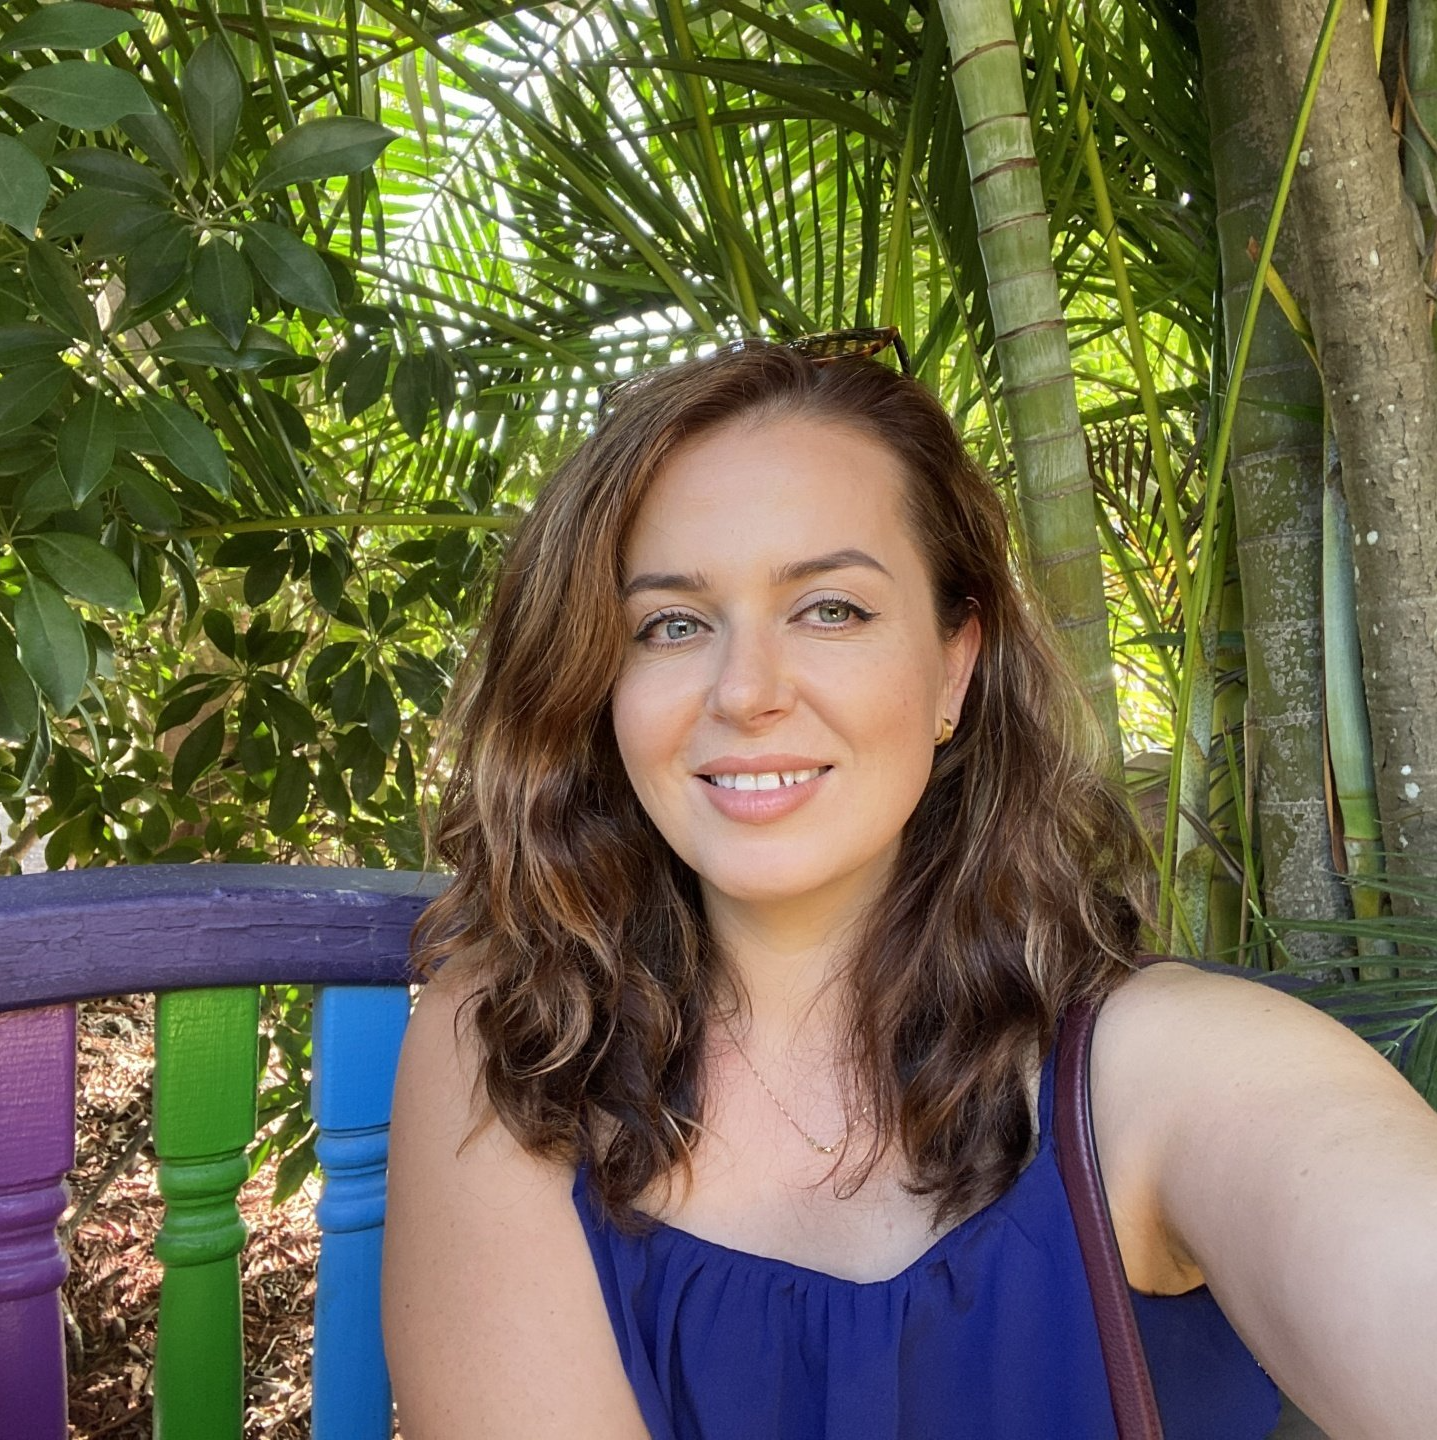 A woman is taking a selfie while sitting on a colorful bench.